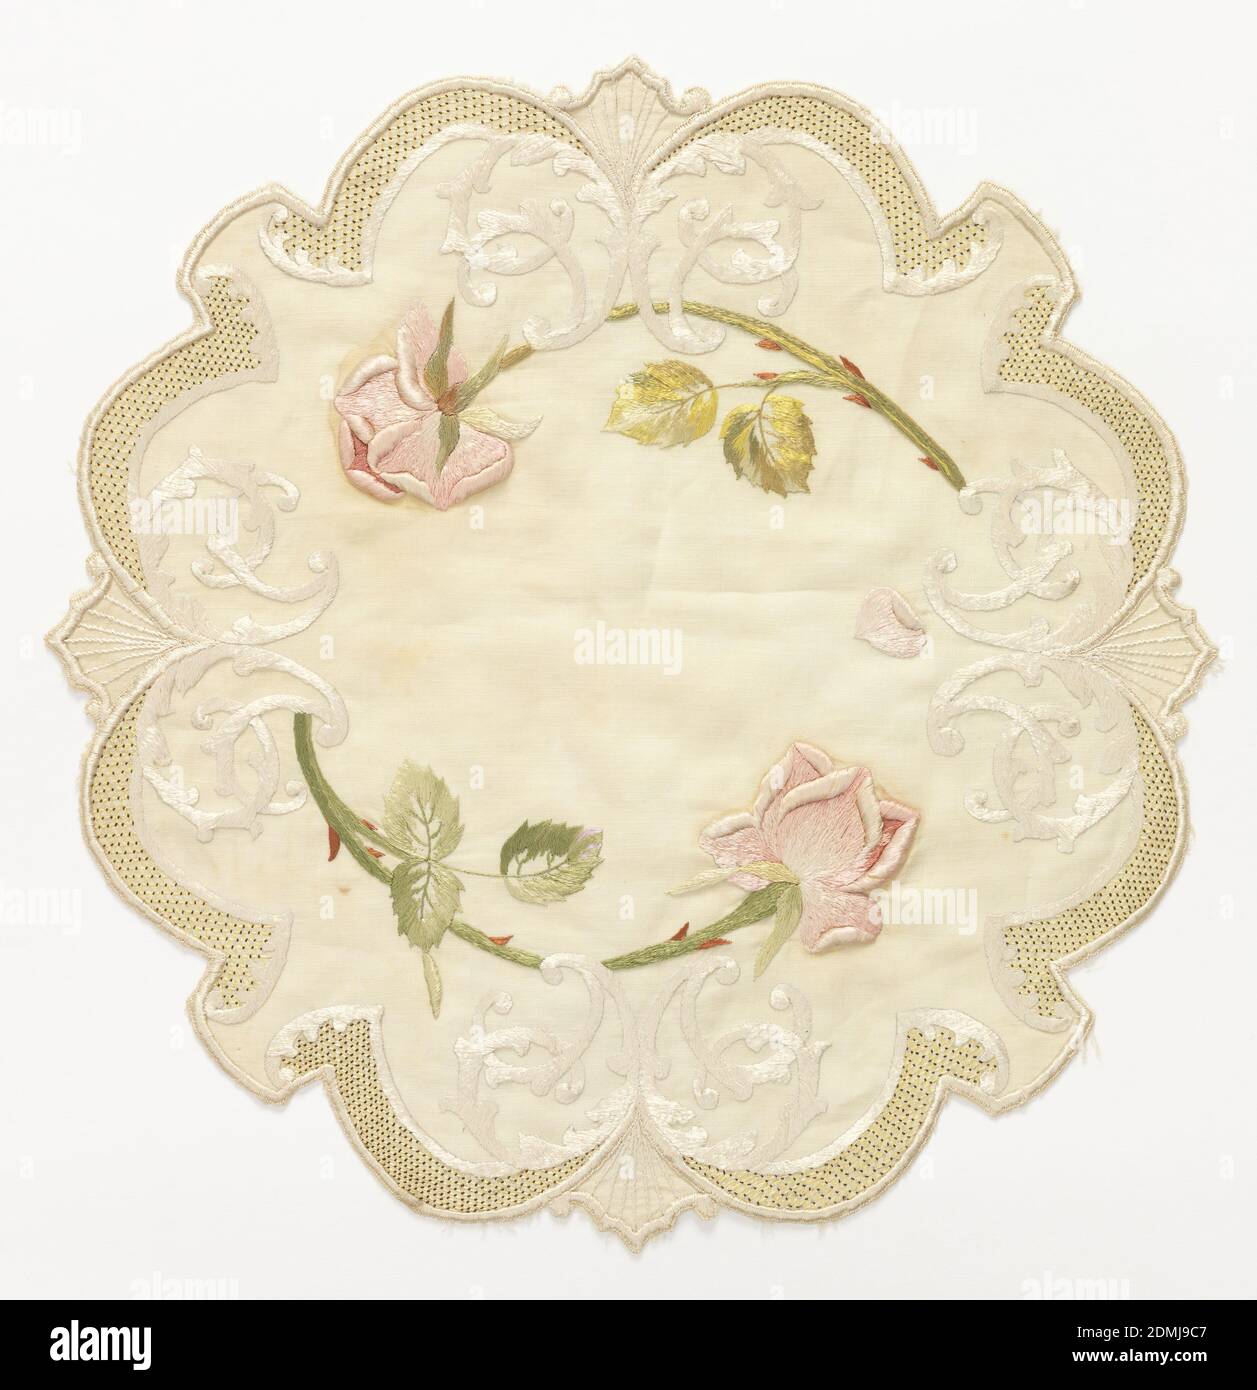 Table mat, Medium: silk embroidery on linen foundation Technique: embroidered using satin stitches on plain weave, Table mat of off-white linen, approximately round with scalloped edges. Embroidered in pale greens, pinks, red and off-white silks with a cipher entwined with two pink roses. Border of small yellow lattice with red dots., USA, late 19th century, embroidery & stitching, Table mat Stock Photo